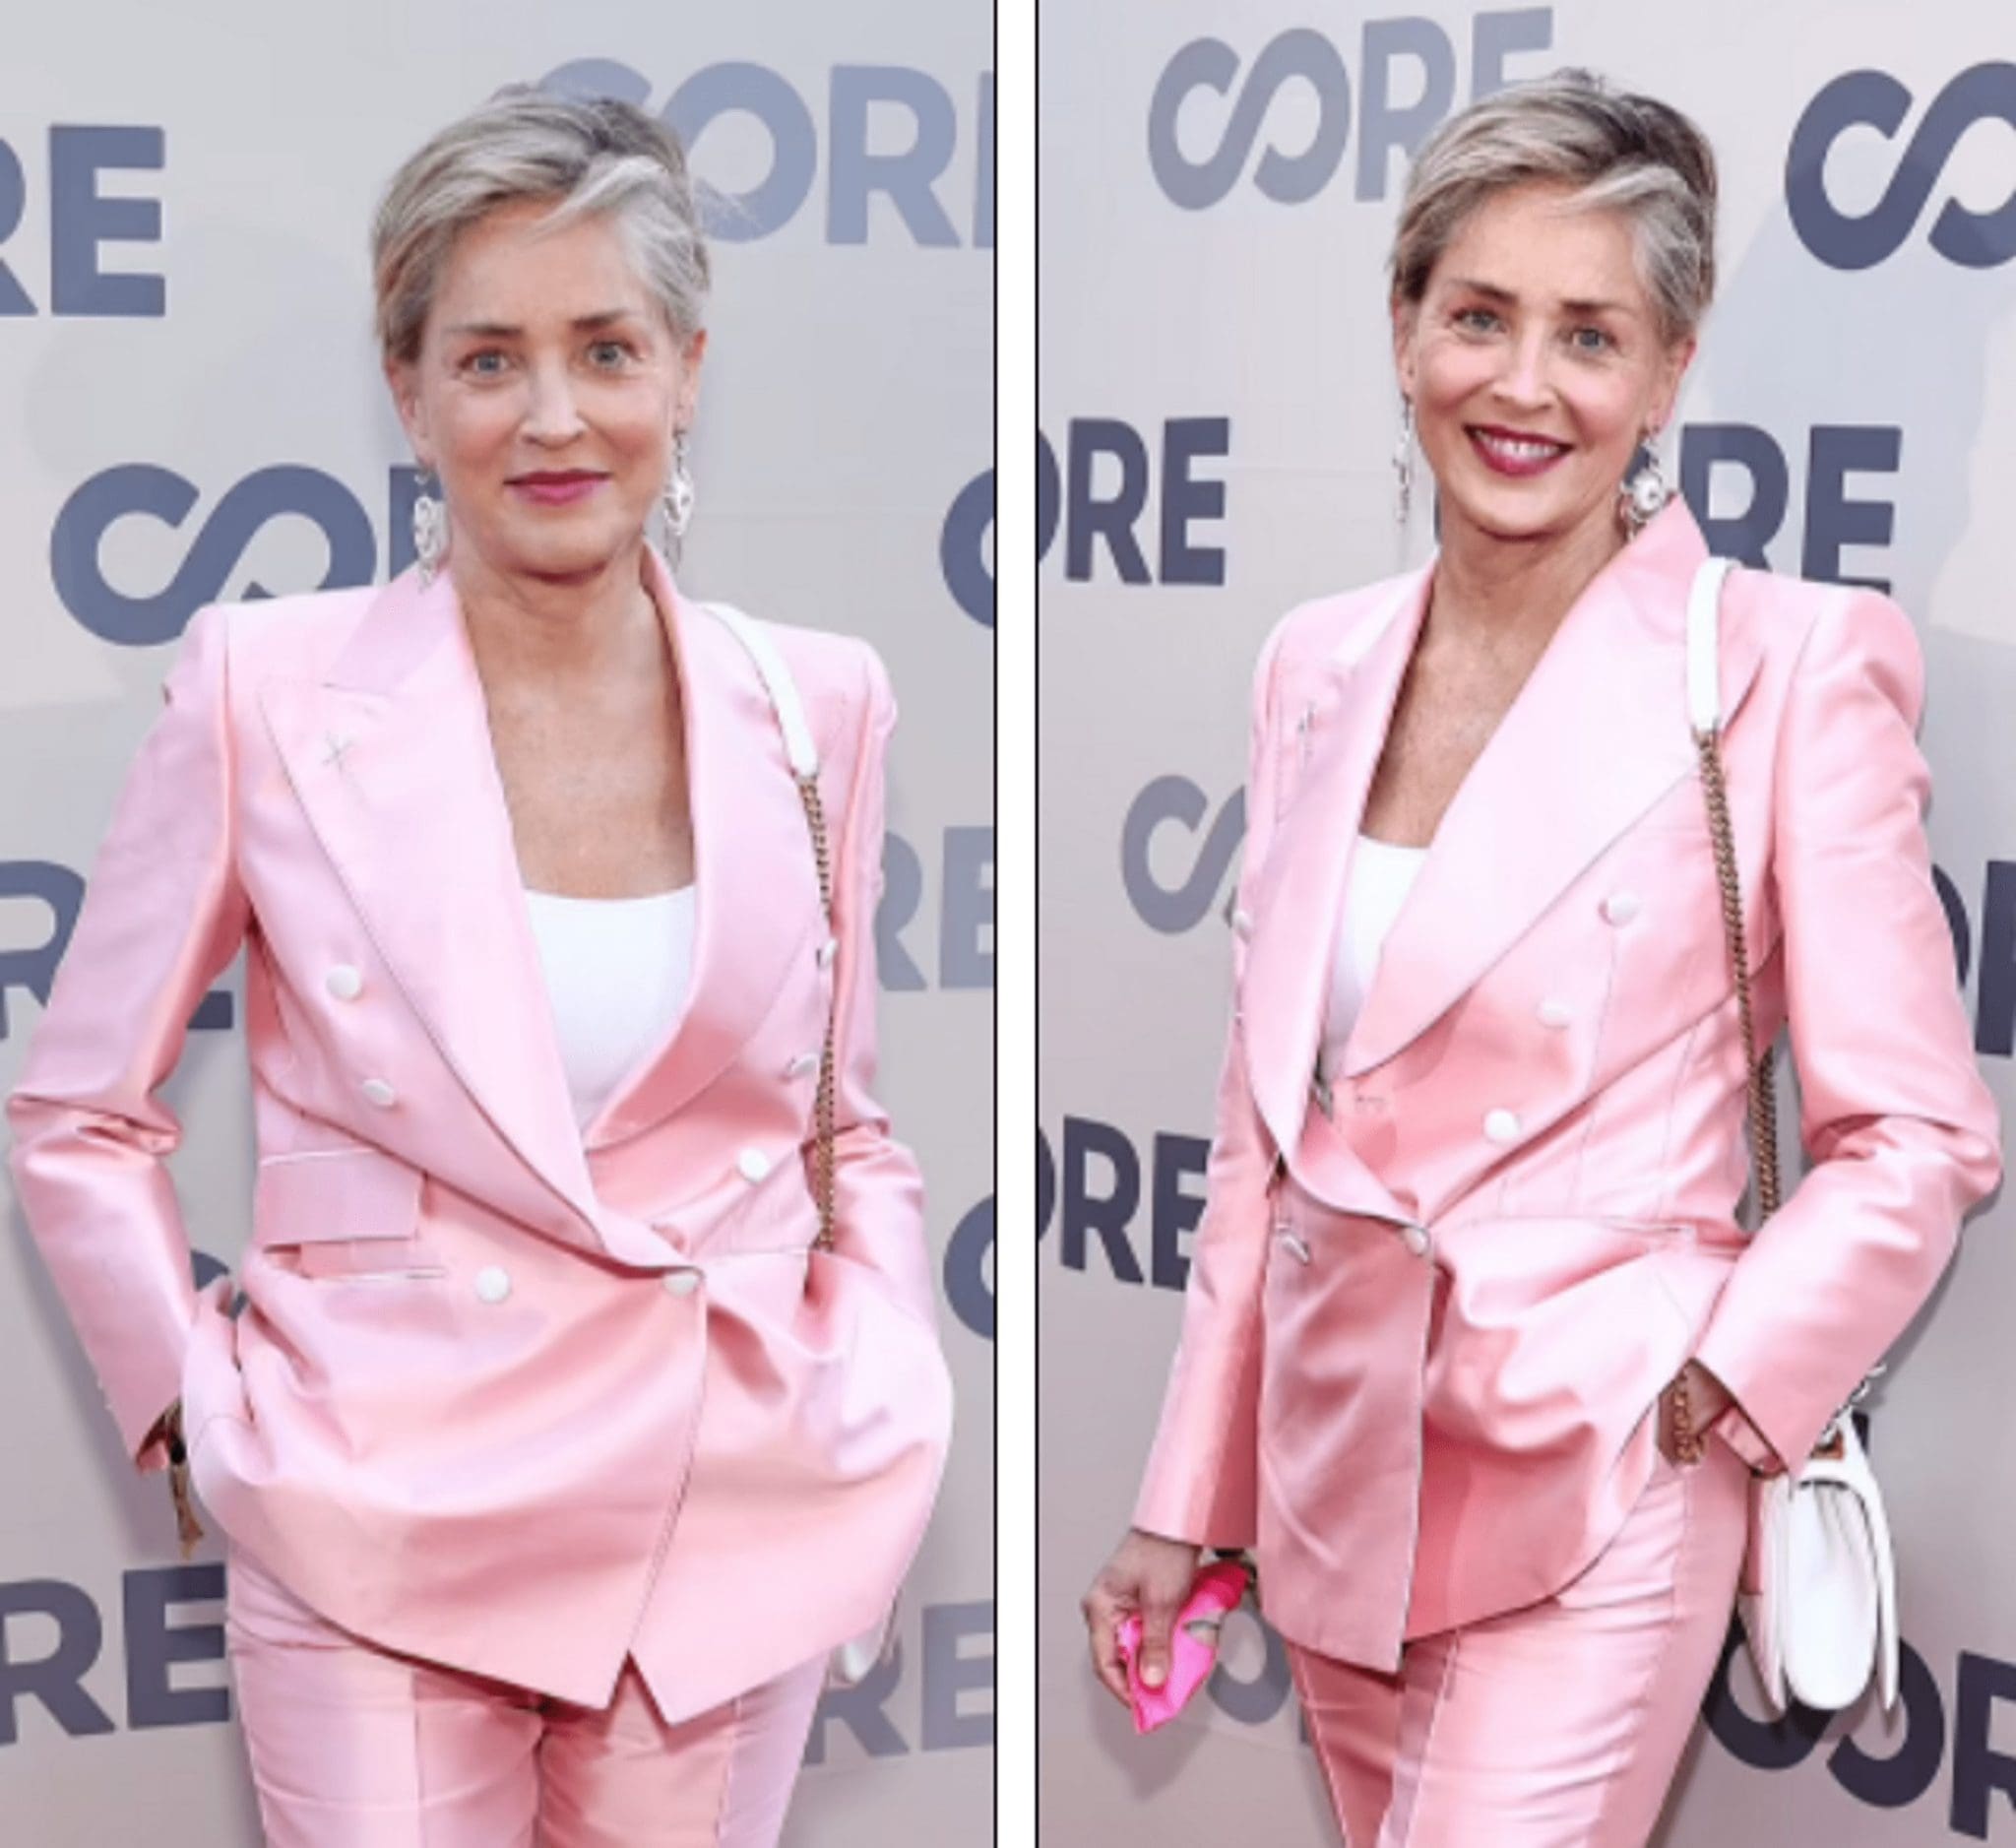 Sharon Stone, in a pink satin suit, attended a charity evening of Sean Penn